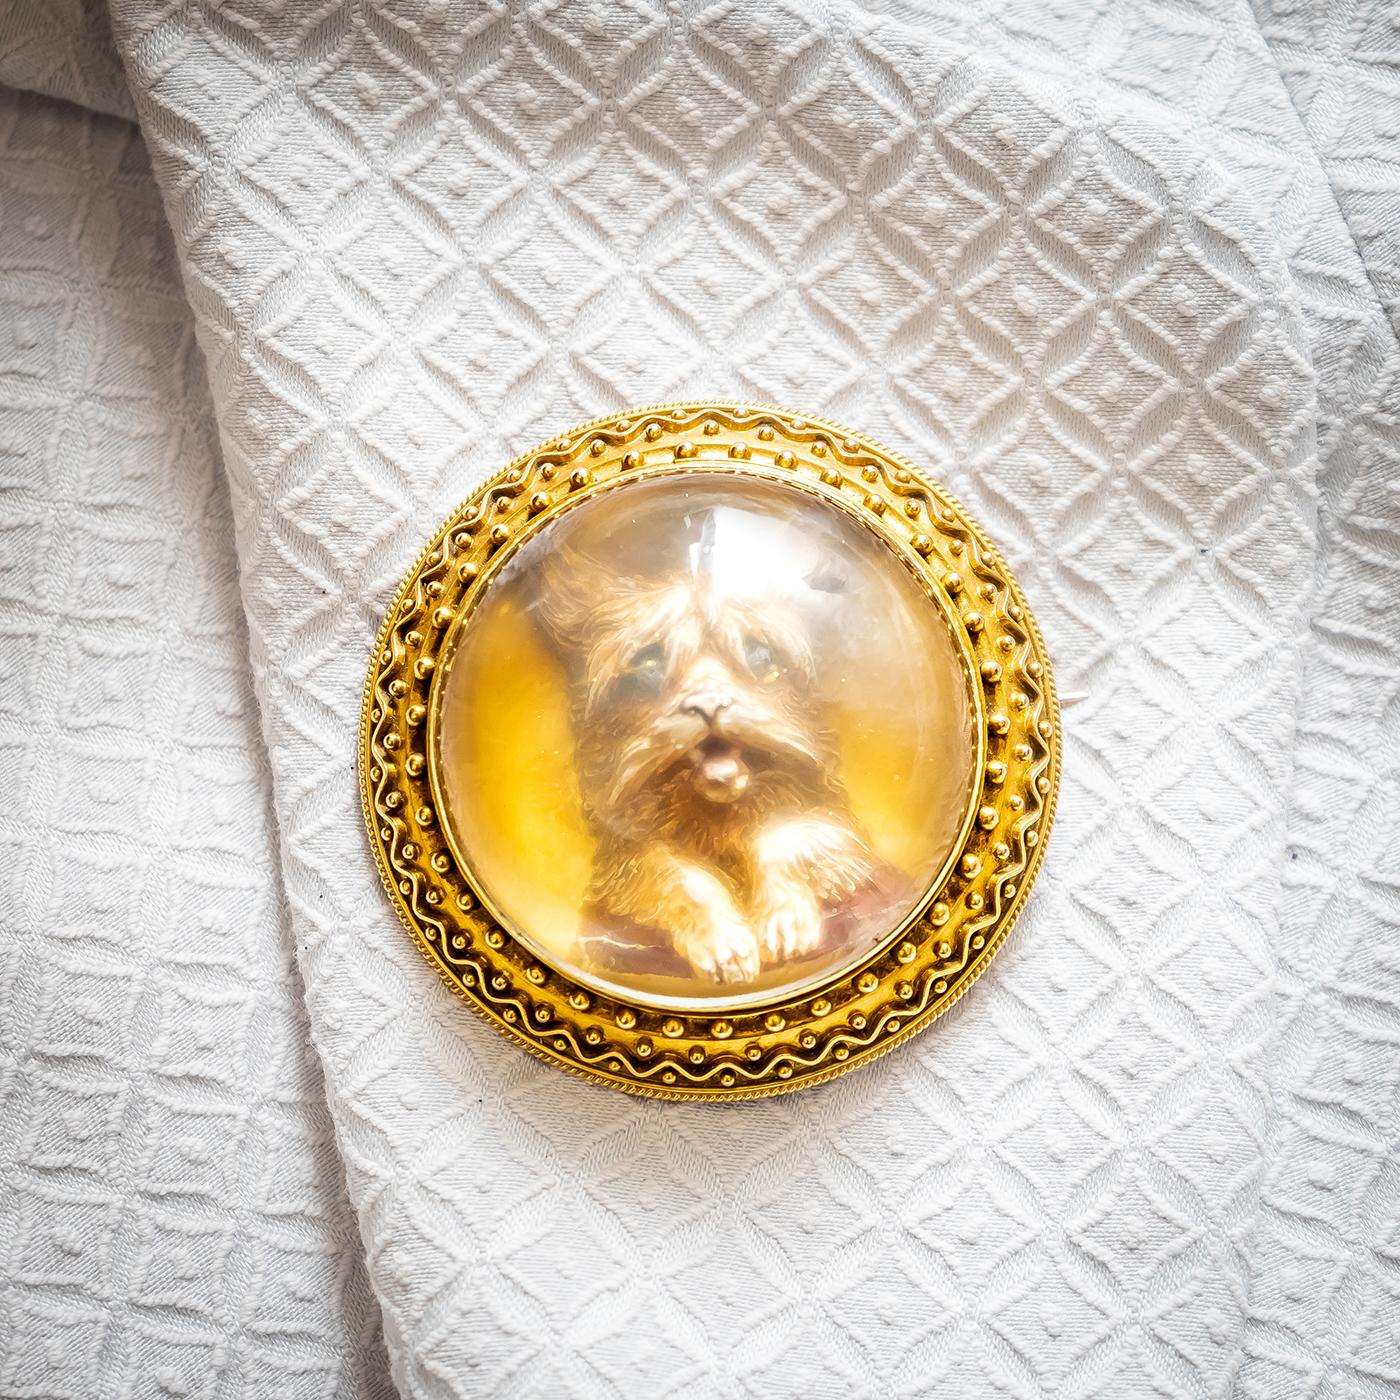 A Victorian reverse crystal Norwich terrier dog brooch, within a gold Etruscan style frame, with a clear locket back containing a portrait of a gentleman, circa 1880.

The brooch measures approximately 51mm in diameter.